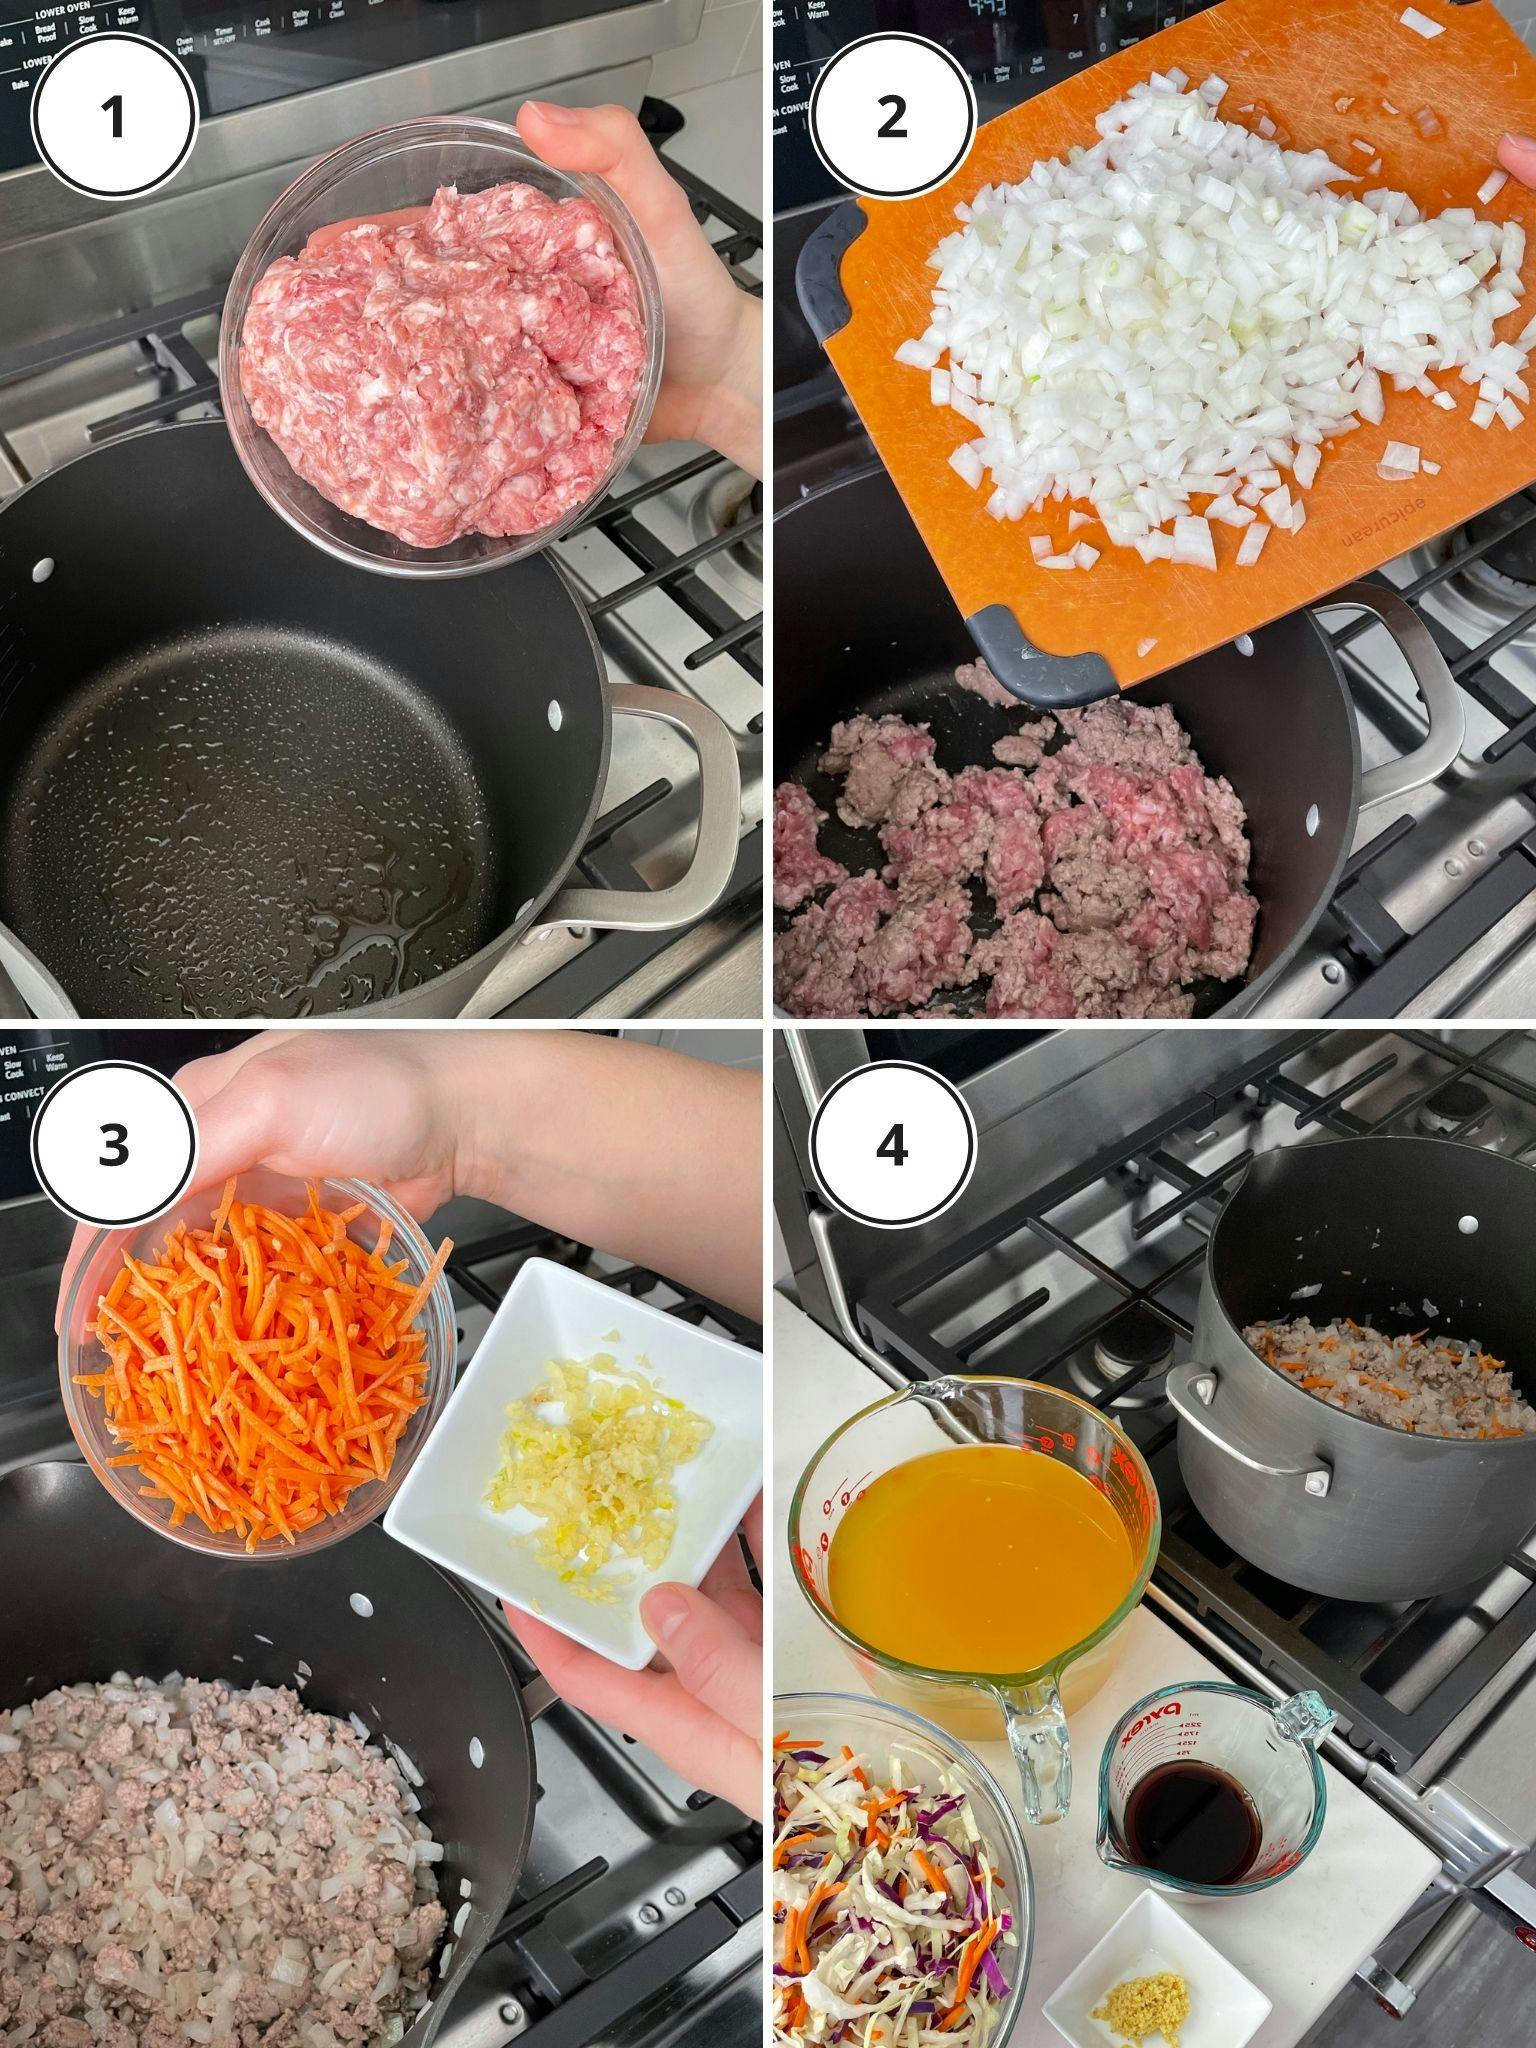 Step by step grid of pictures of how to make the recipe.